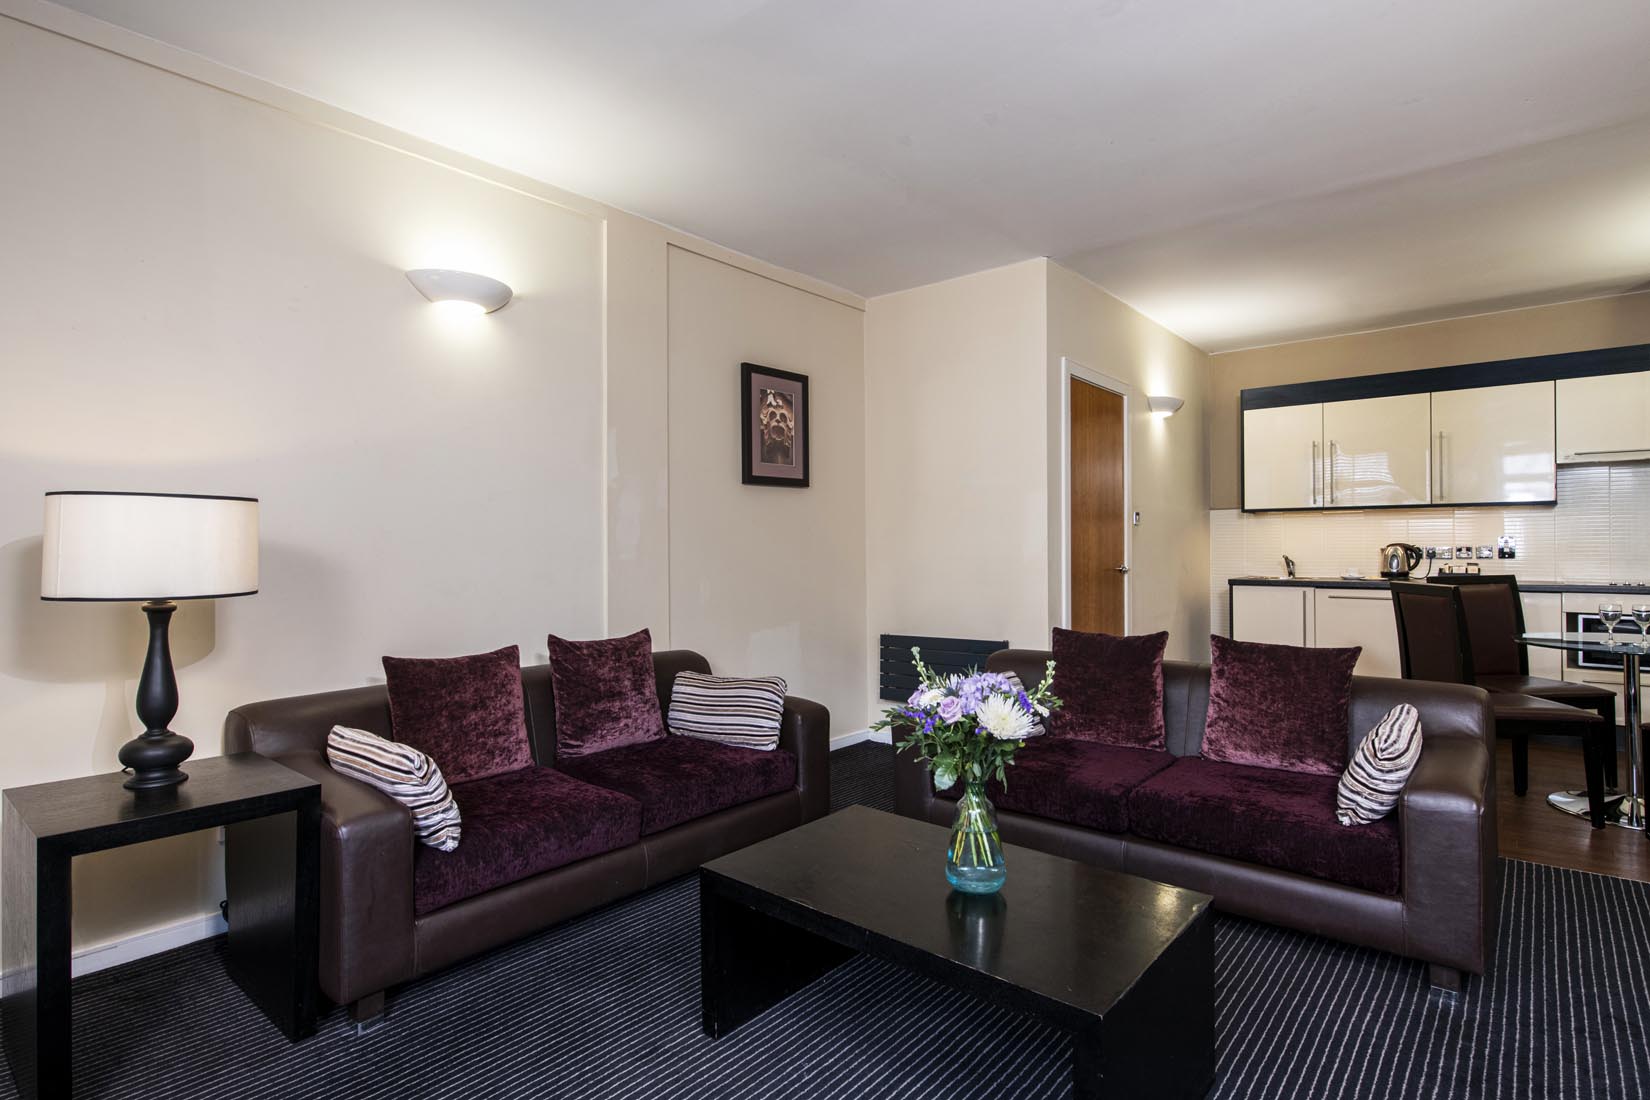 2 bedroom deluxe serviced apartments flat in Glasgow living area & kitchen